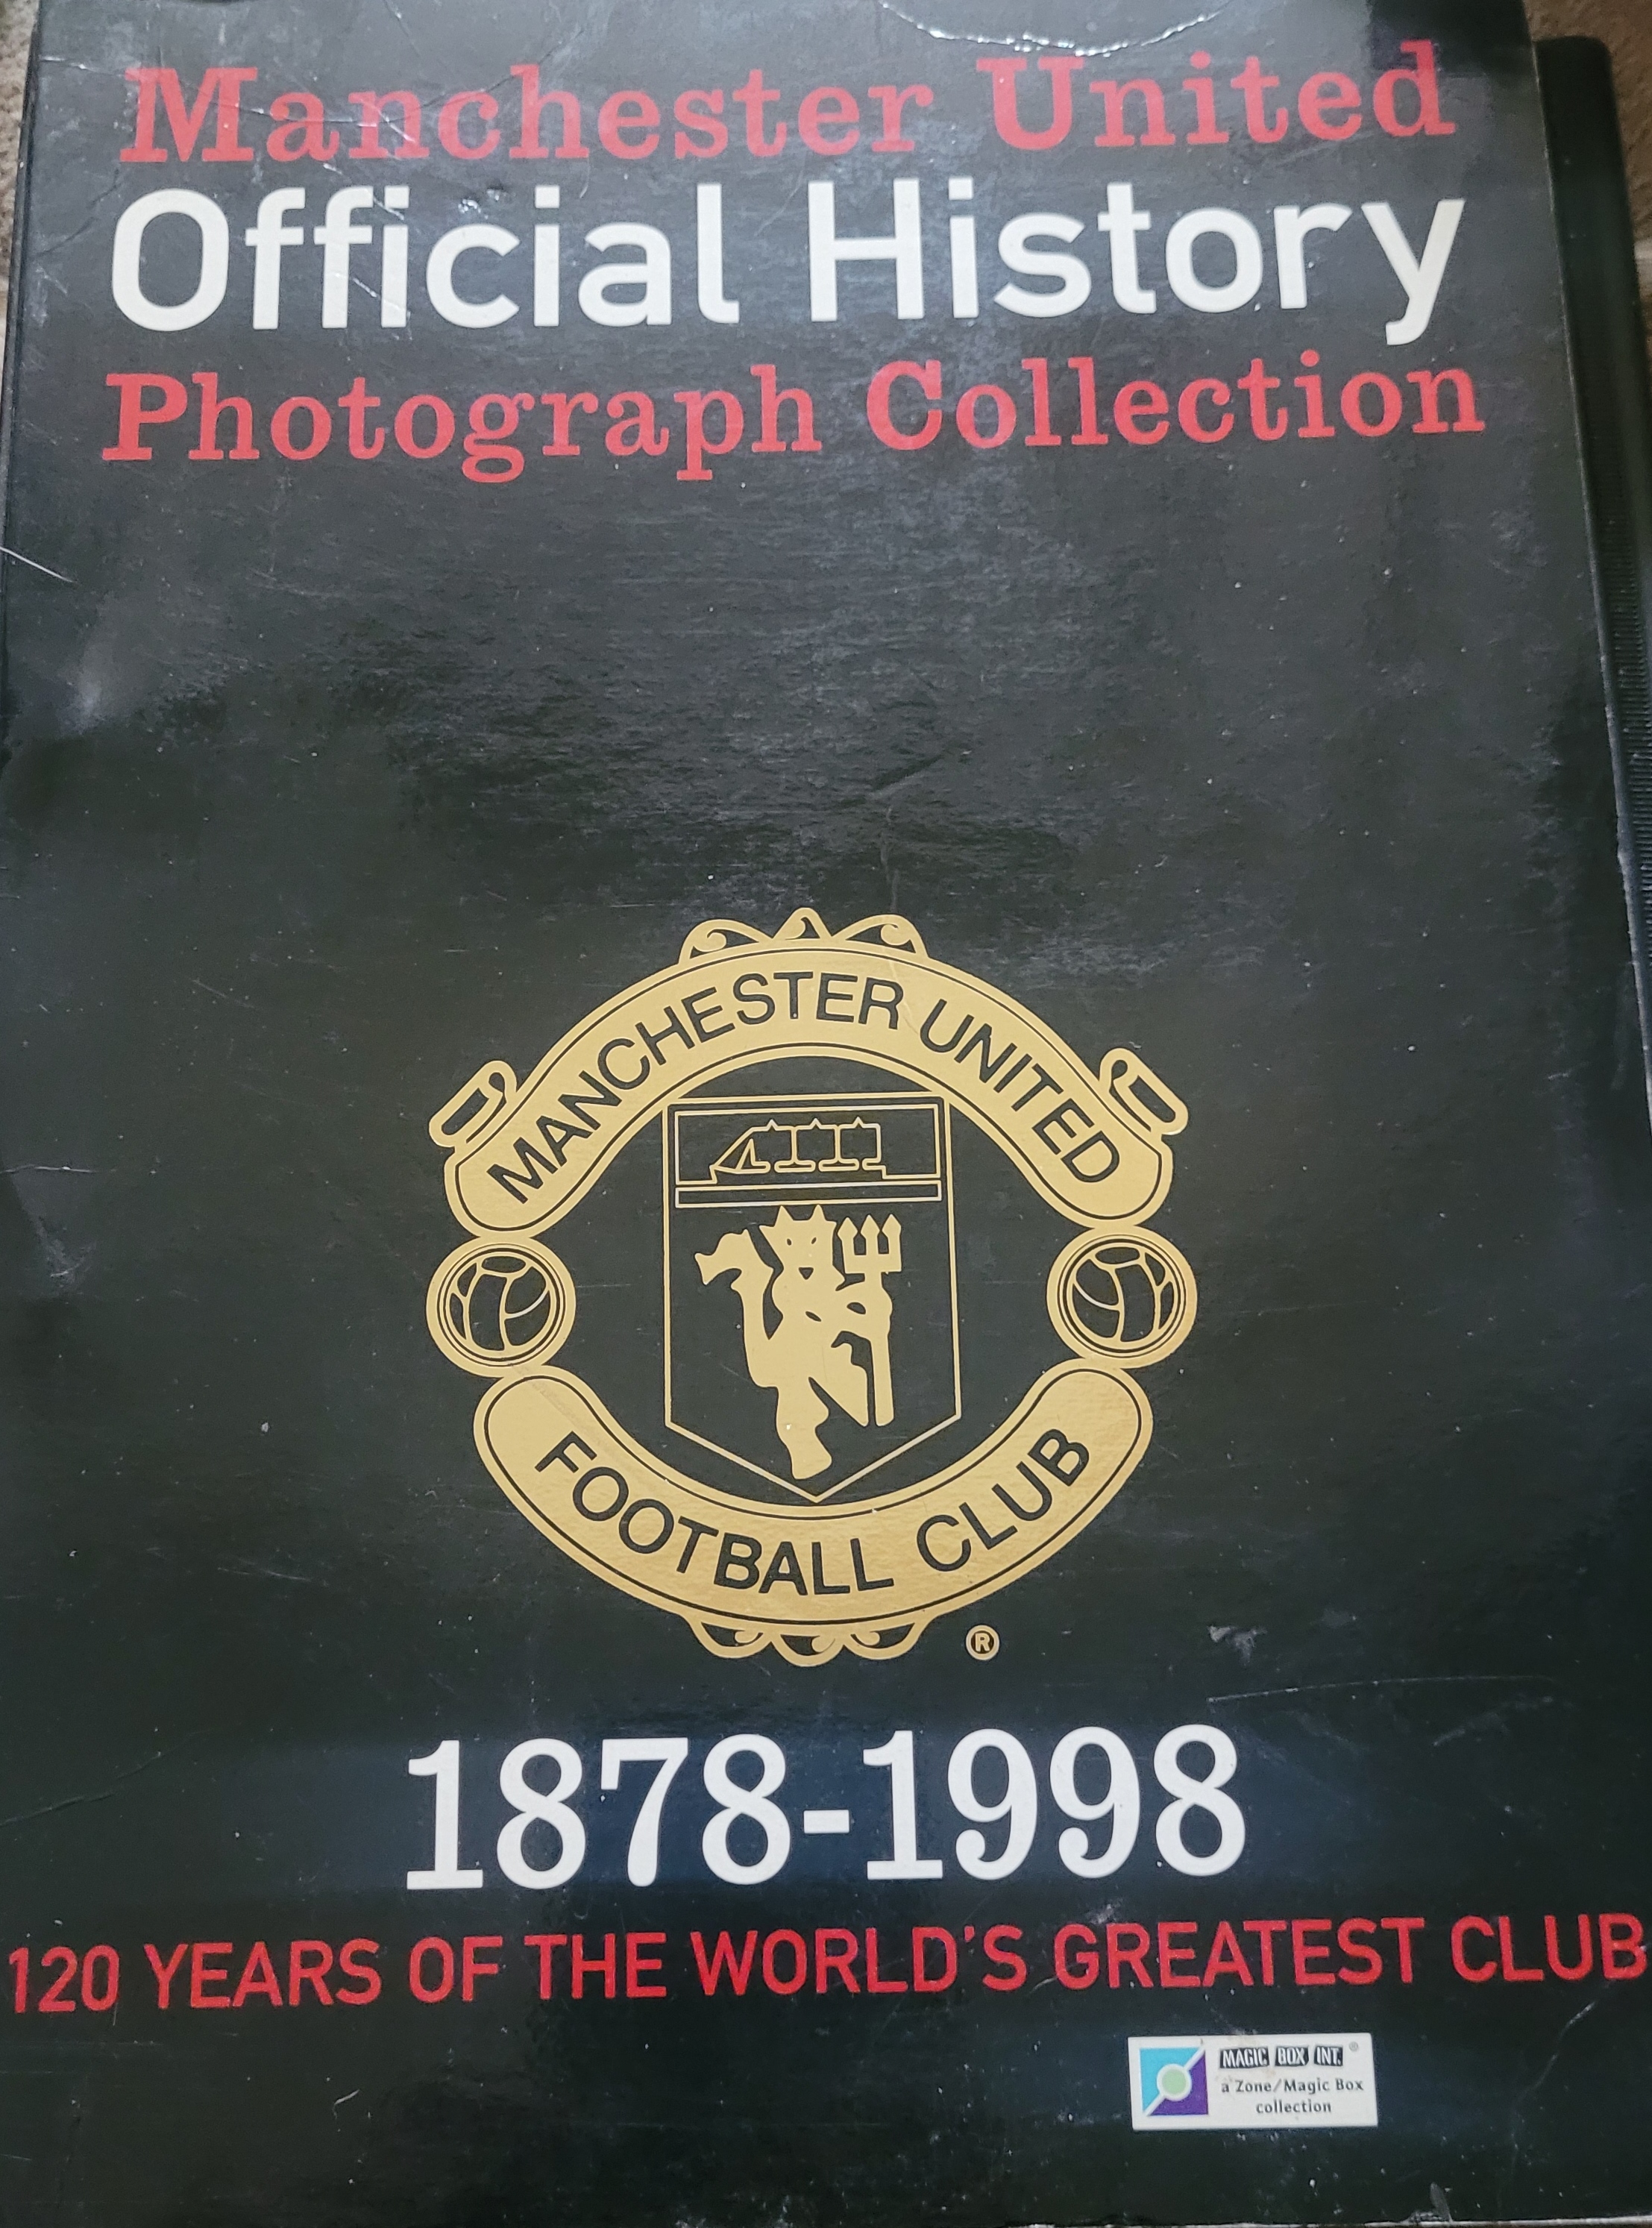 MANCHESTER UNITED OFFICIAL HISTORY PHOTOGRAPH COLLECTION